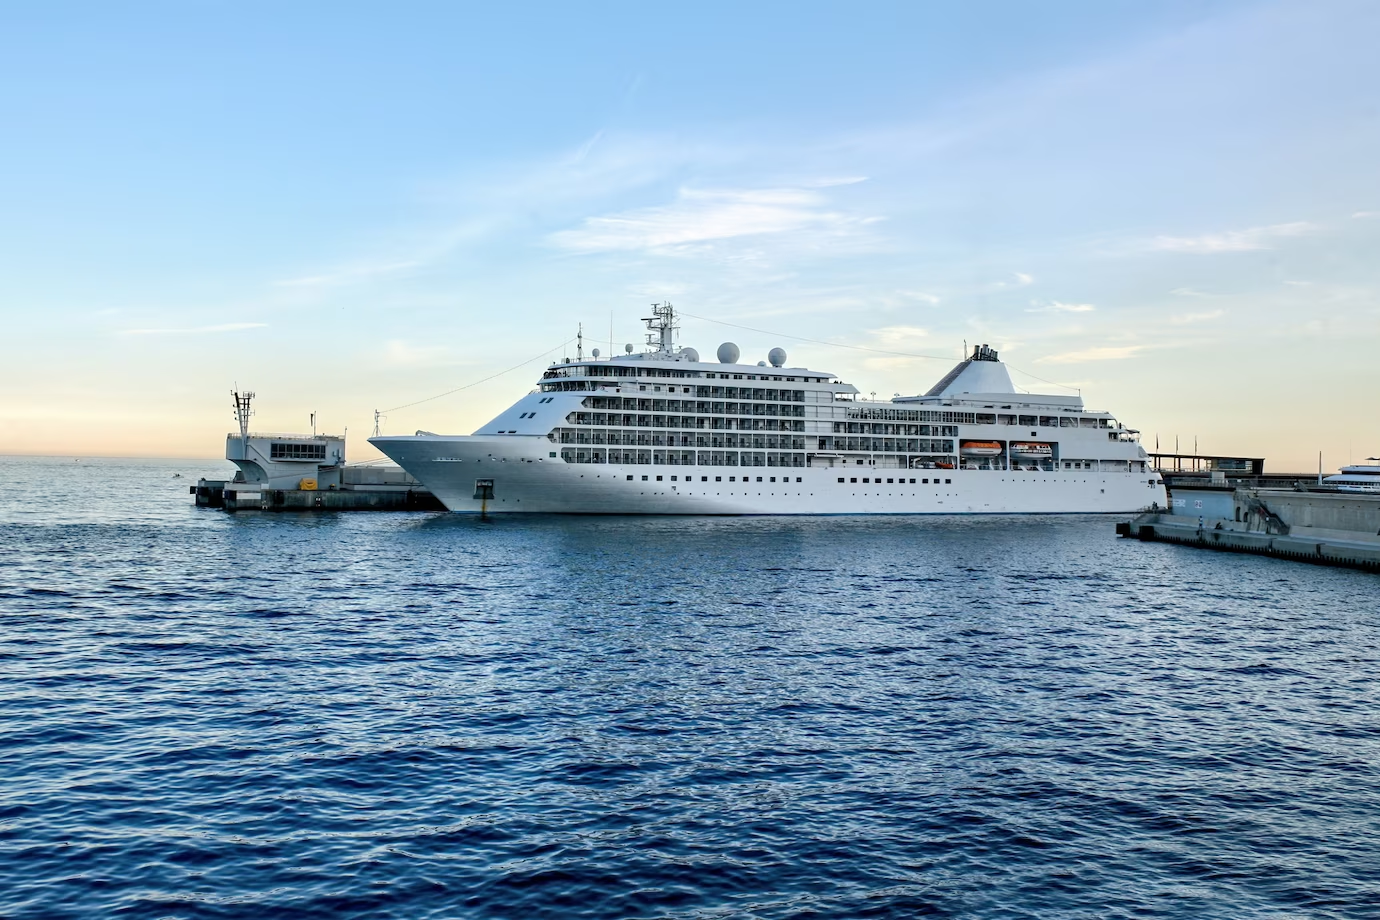 cruise ship safety and cruise etiquette